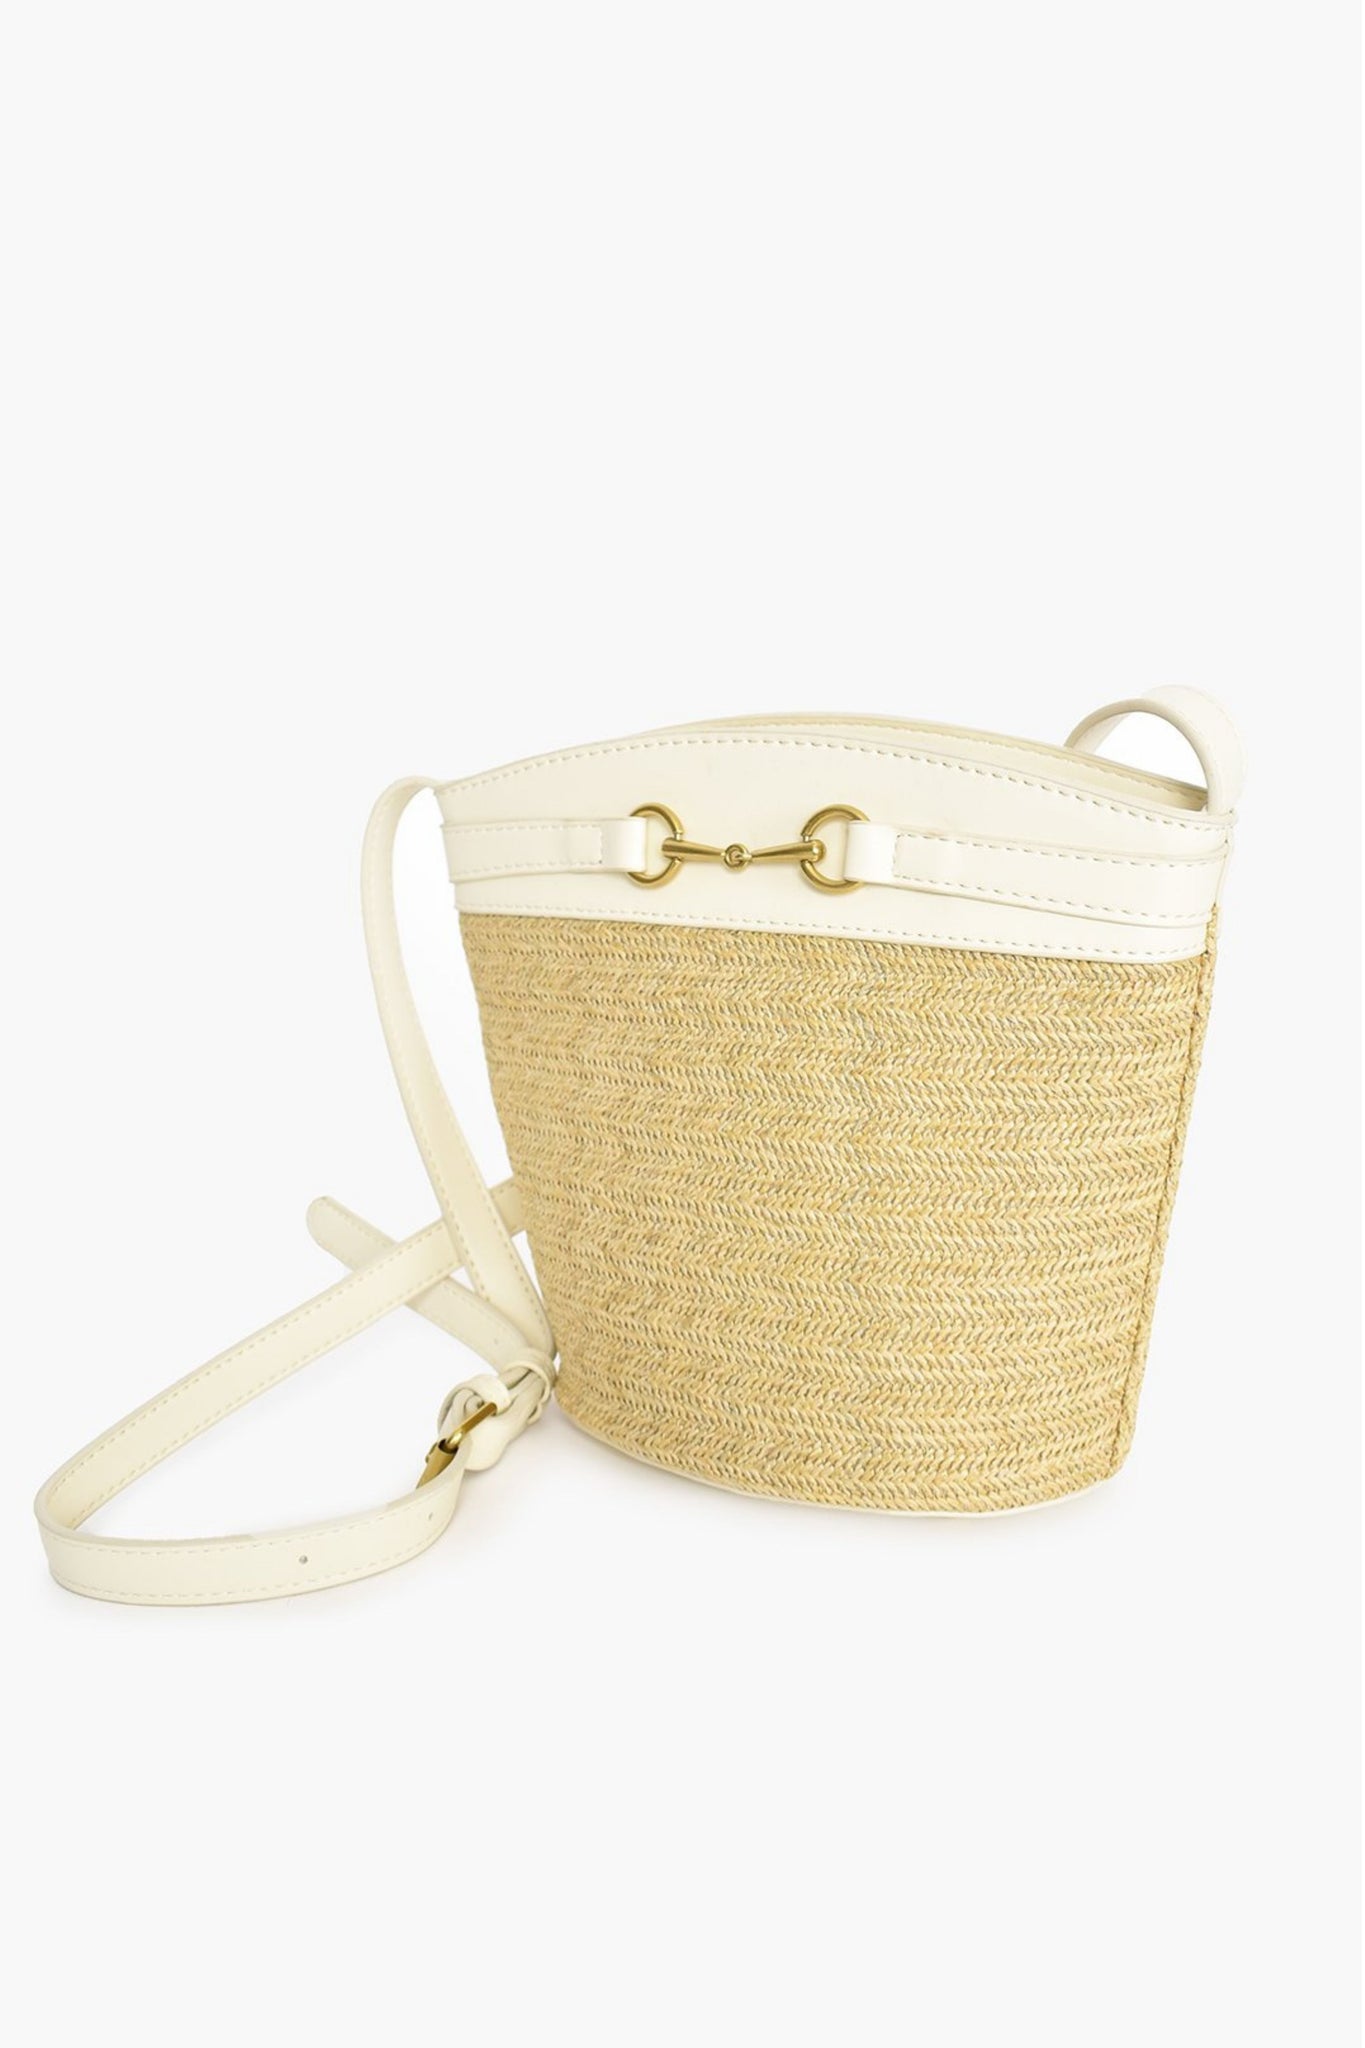 Weave Trim Toggle Front Bucket Bag - Natural/White